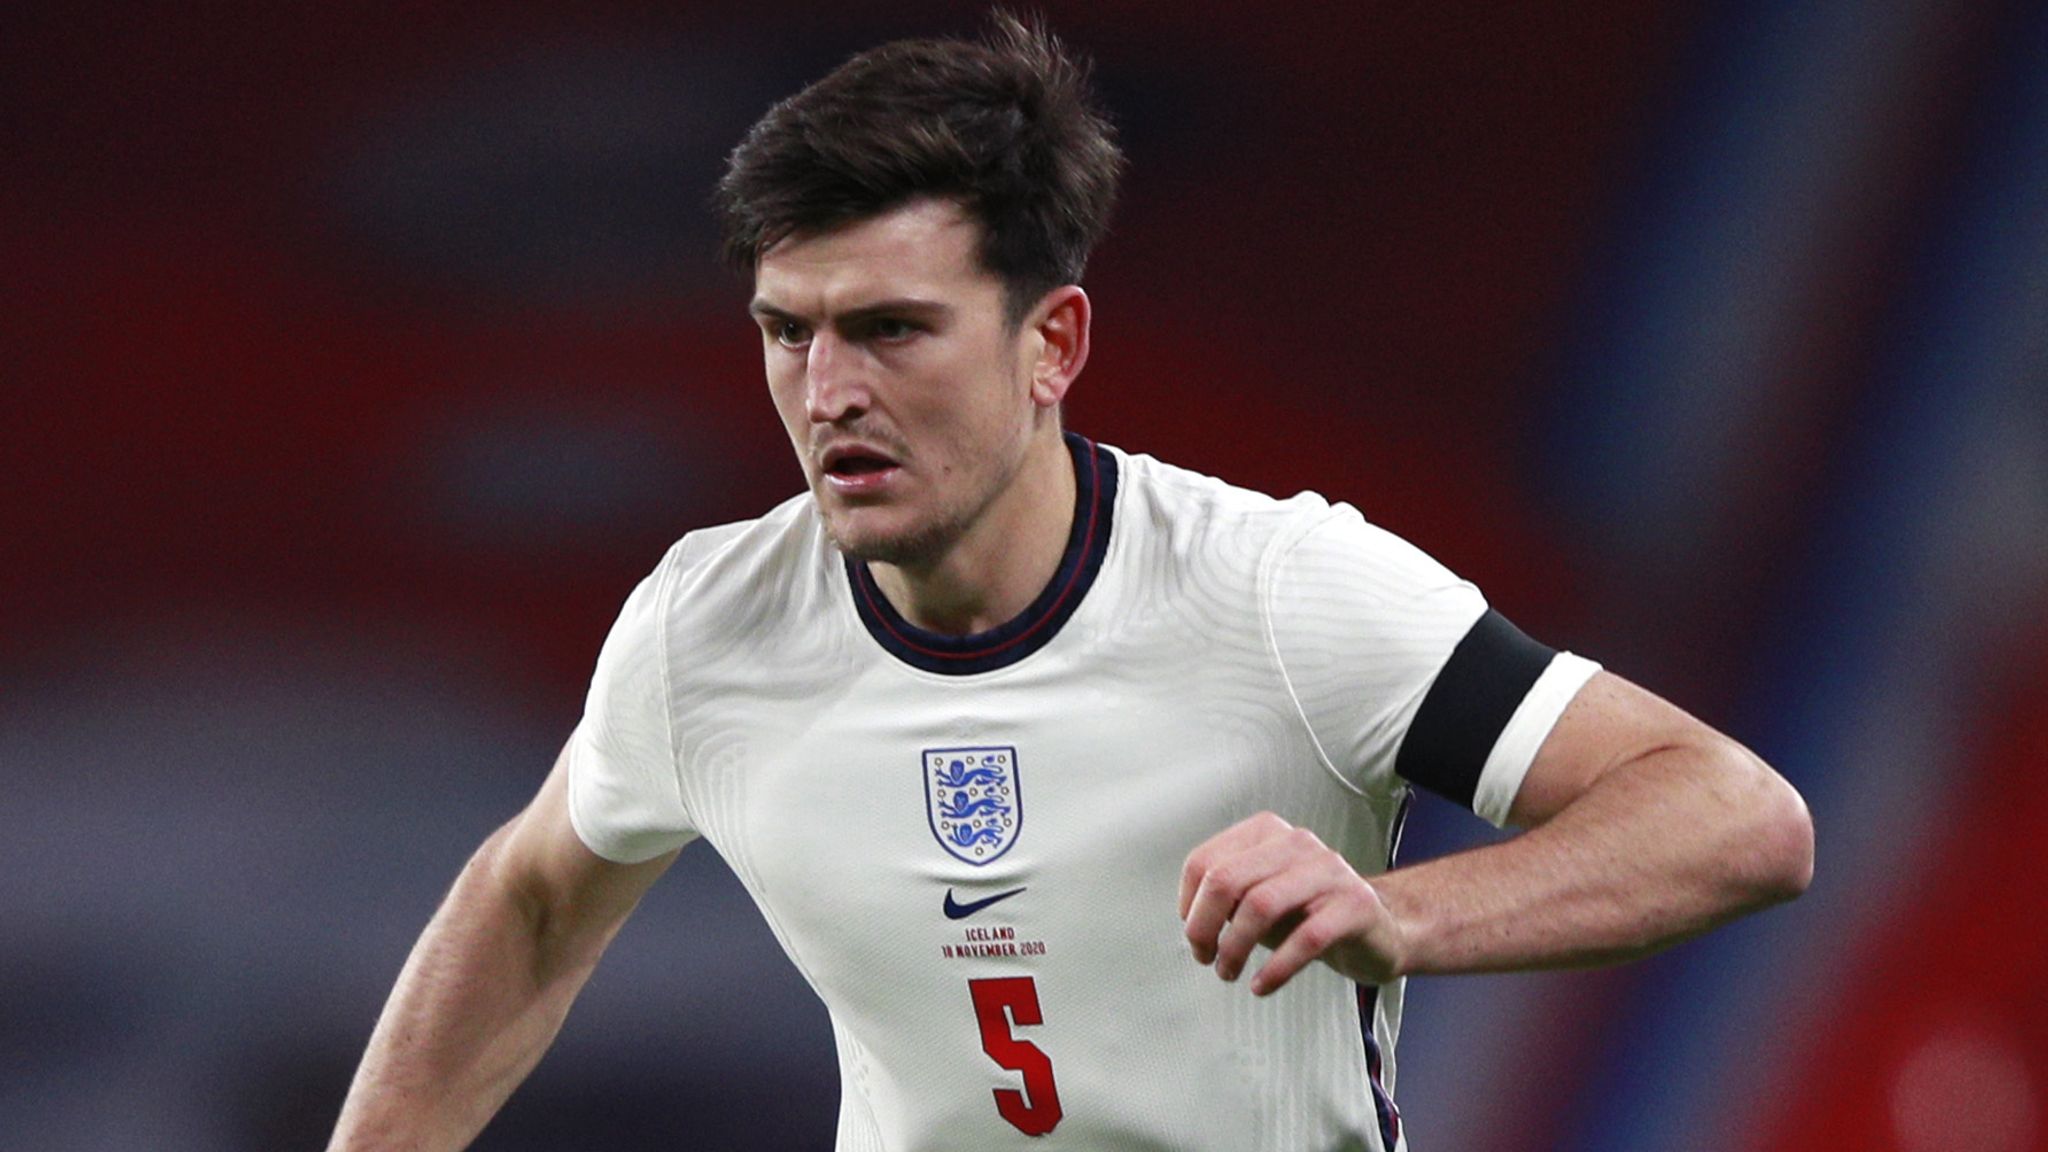  A photo of English footballer Harry Maguire playing for the England national team. Maguire is one of the defenders called up by Gareth Southgate for the England squad. Other defenders include John Stones, Marc Guehi, Lewis Dunk, Joe Gomez, Jarrad Branthwaite and Ezri Konsa.